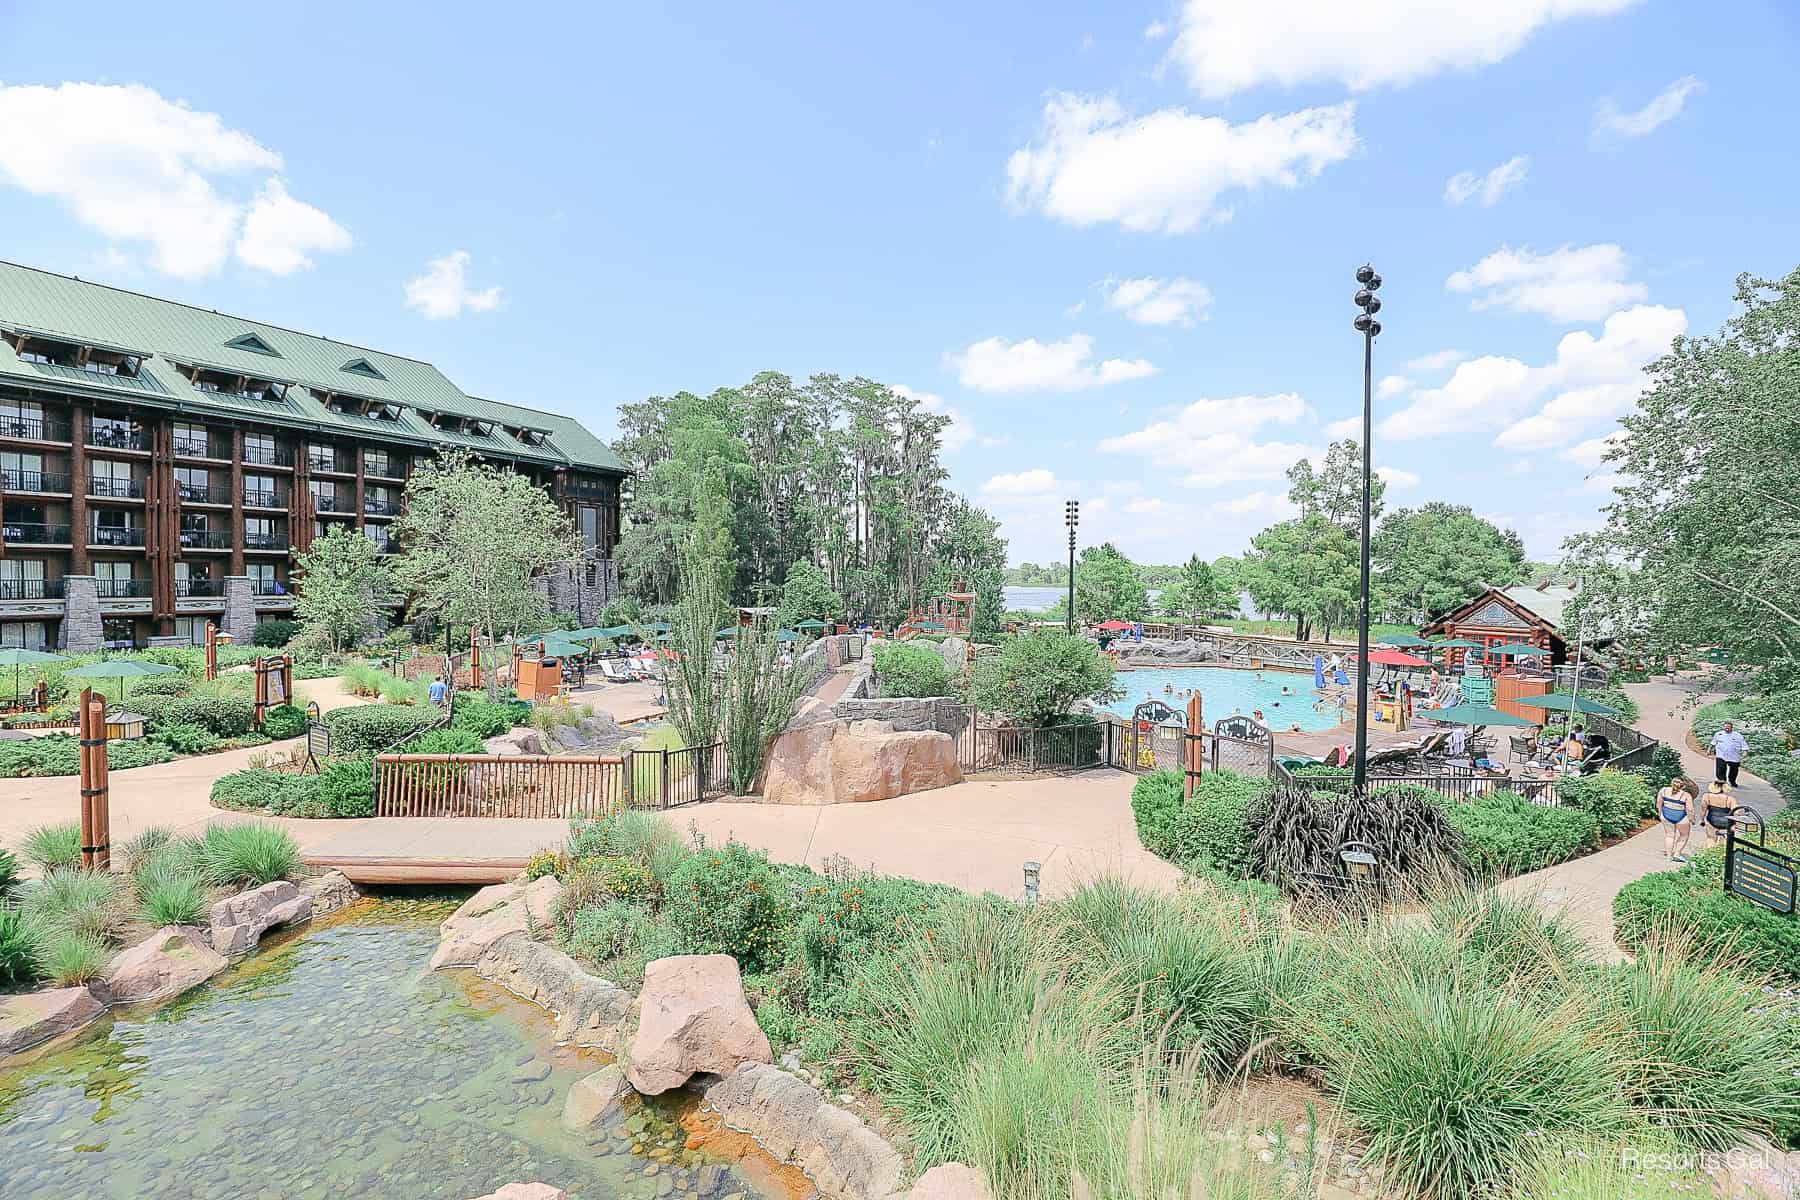 a scenic overlook view from the Wilderness Lodge 